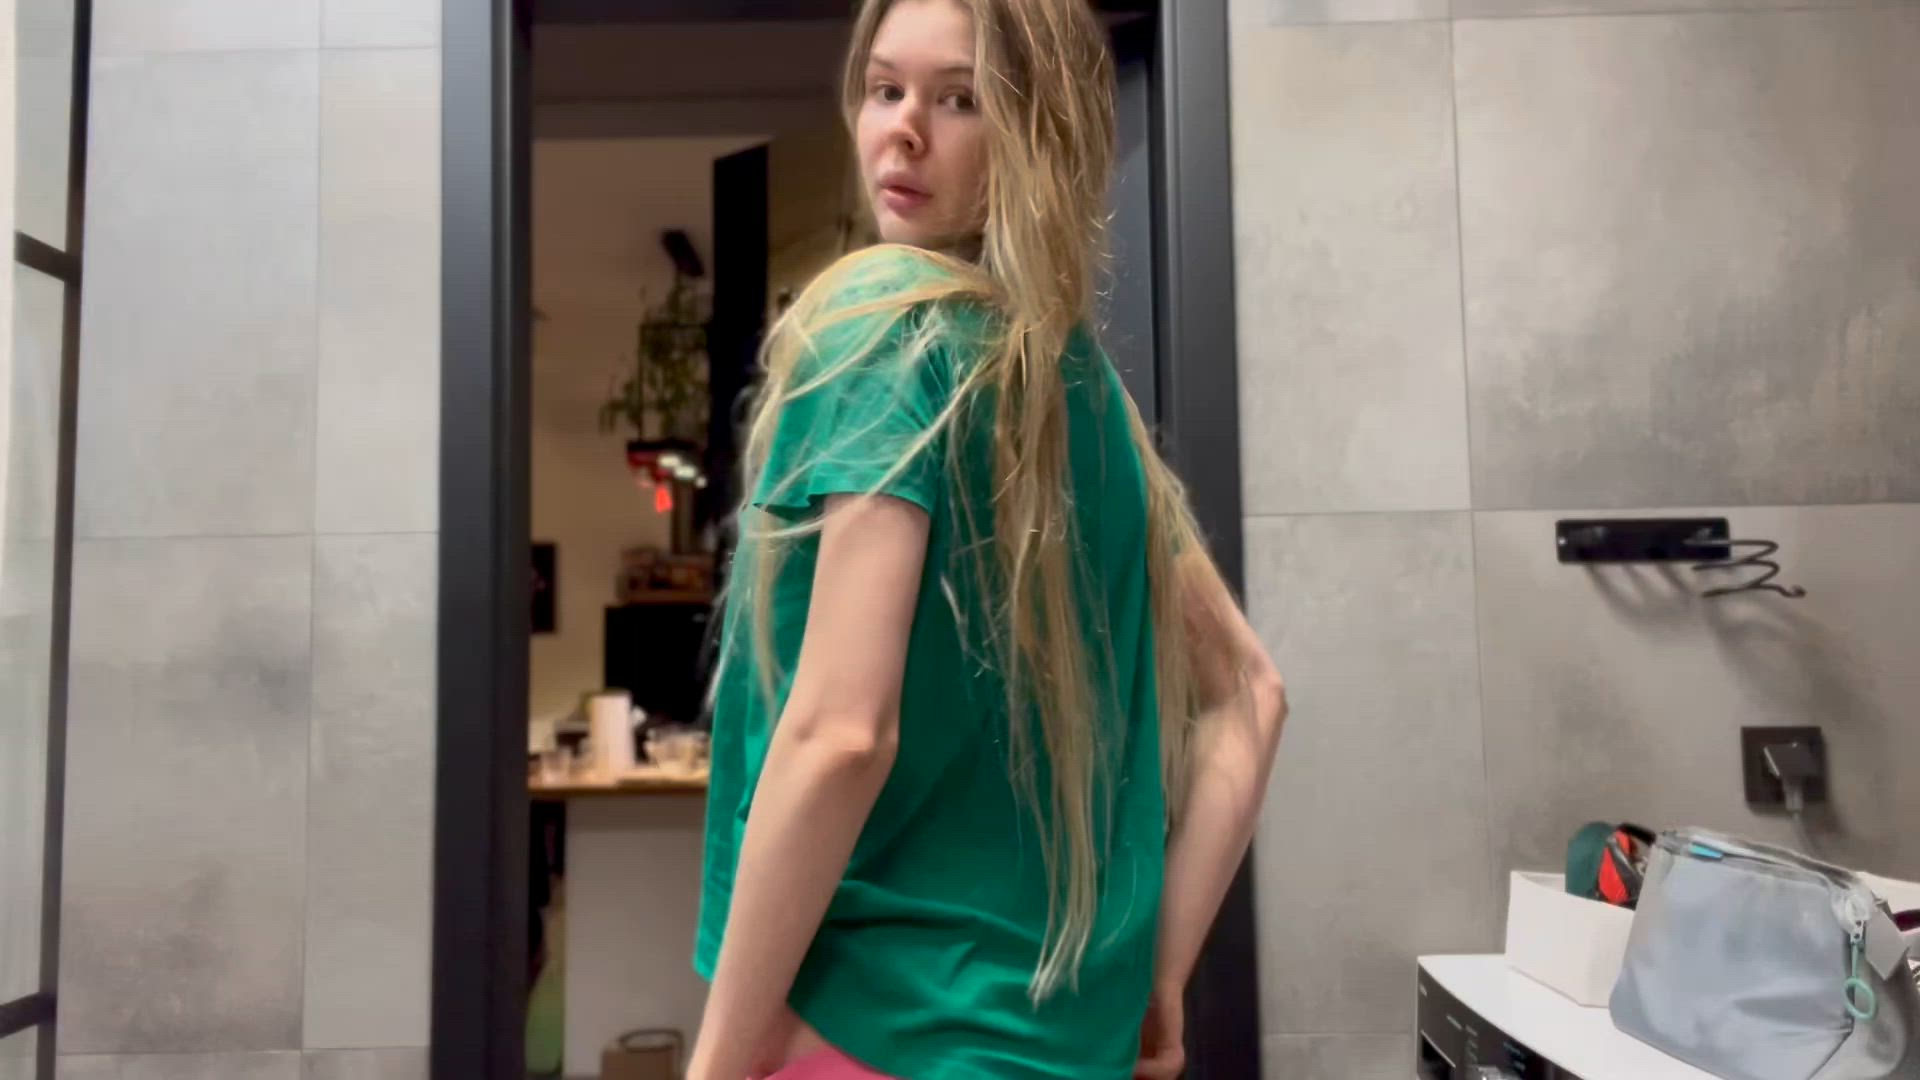 Amateur porn video with onlyfans model whereislily78 <strong>@where_is_lily</strong>